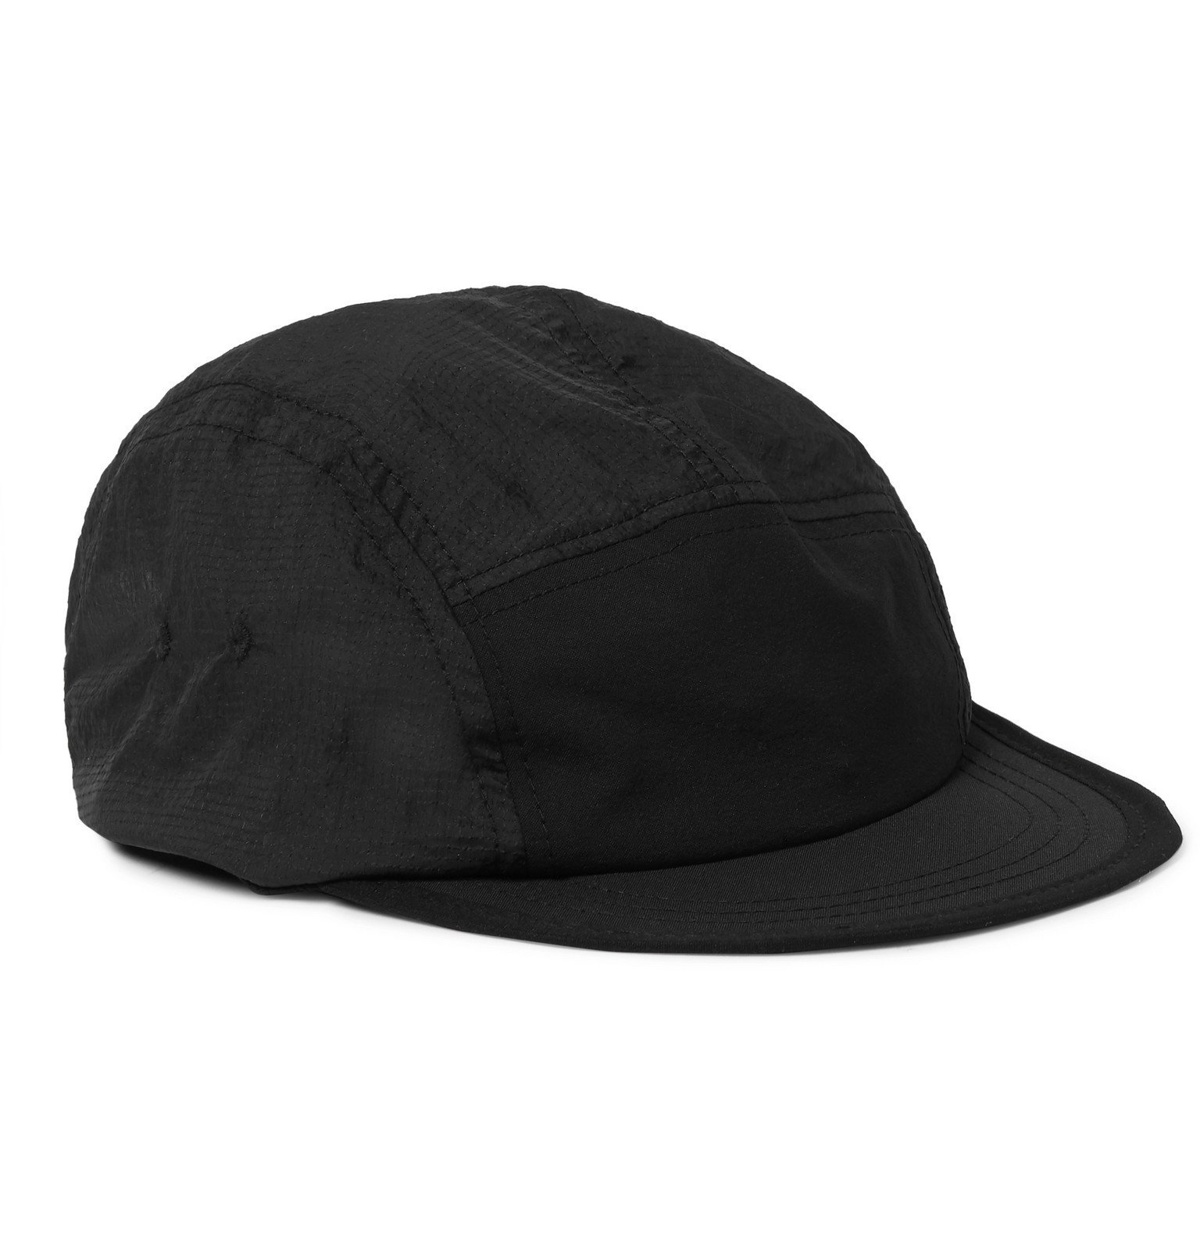 Satisfy - Trail Shell and Ripstop Running Cap - Black Satisfy